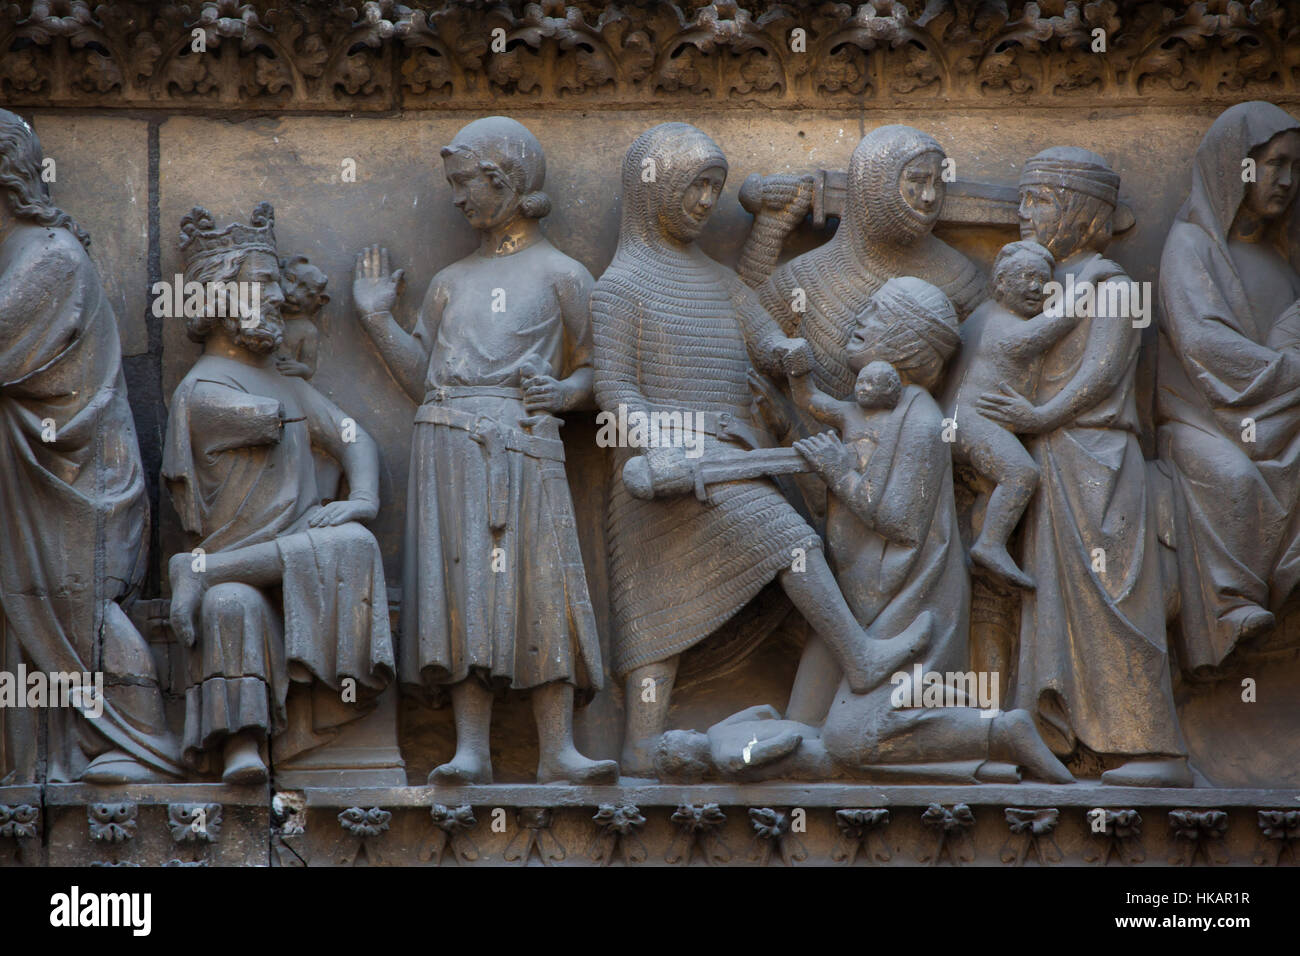 King Herod the Great and the Massacre of the Innocents. Detail of the Gothic tympanum from circa 1250 on the northern facade of the Notre-Dame Cathedral (Notre-Dame de Paris) in Paris, France. Stock Photo